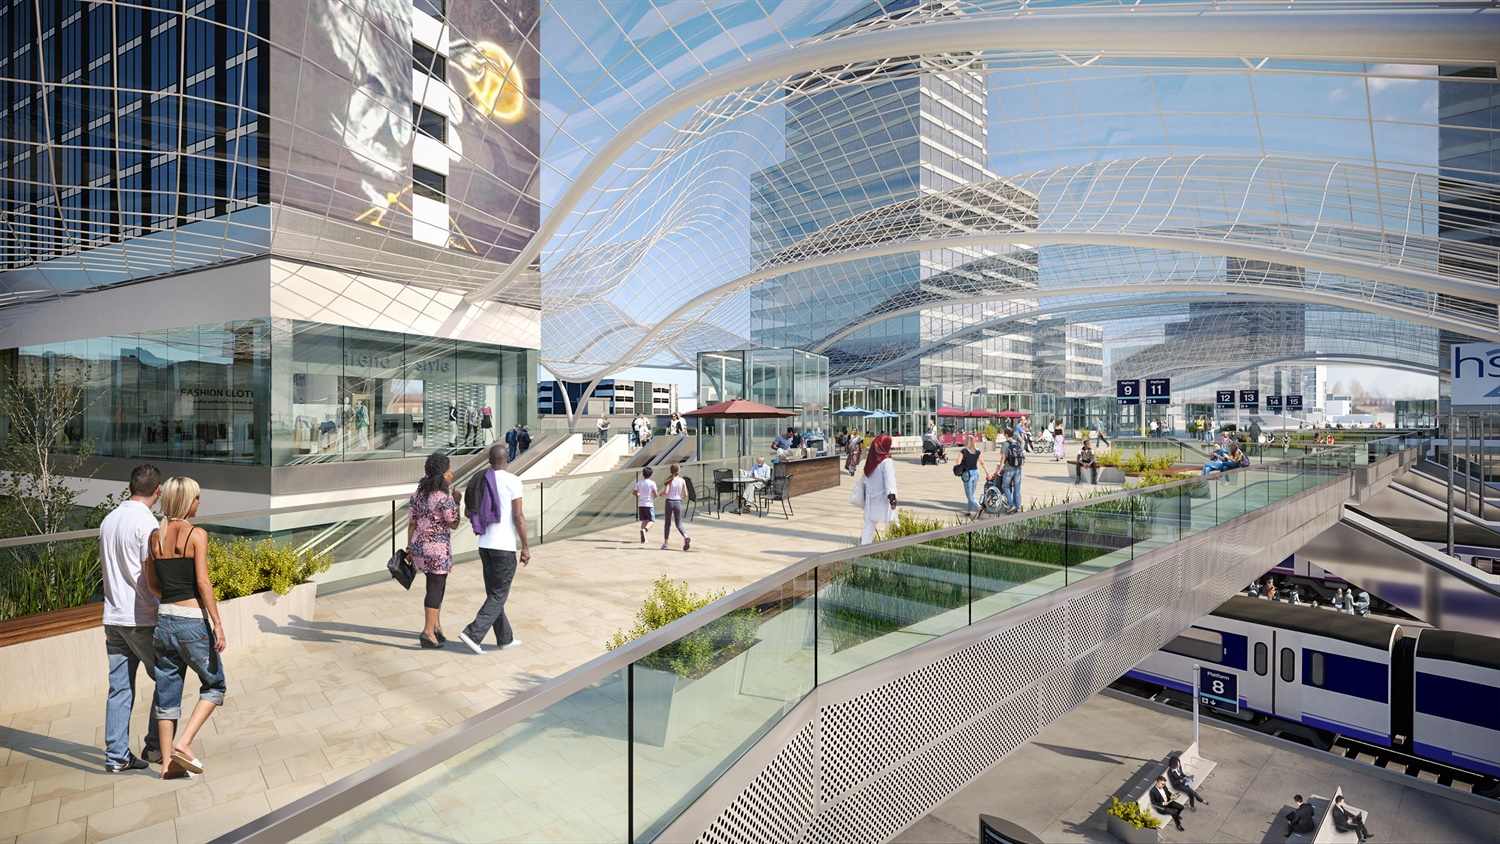 New images of planned £500m Leeds station development revealed